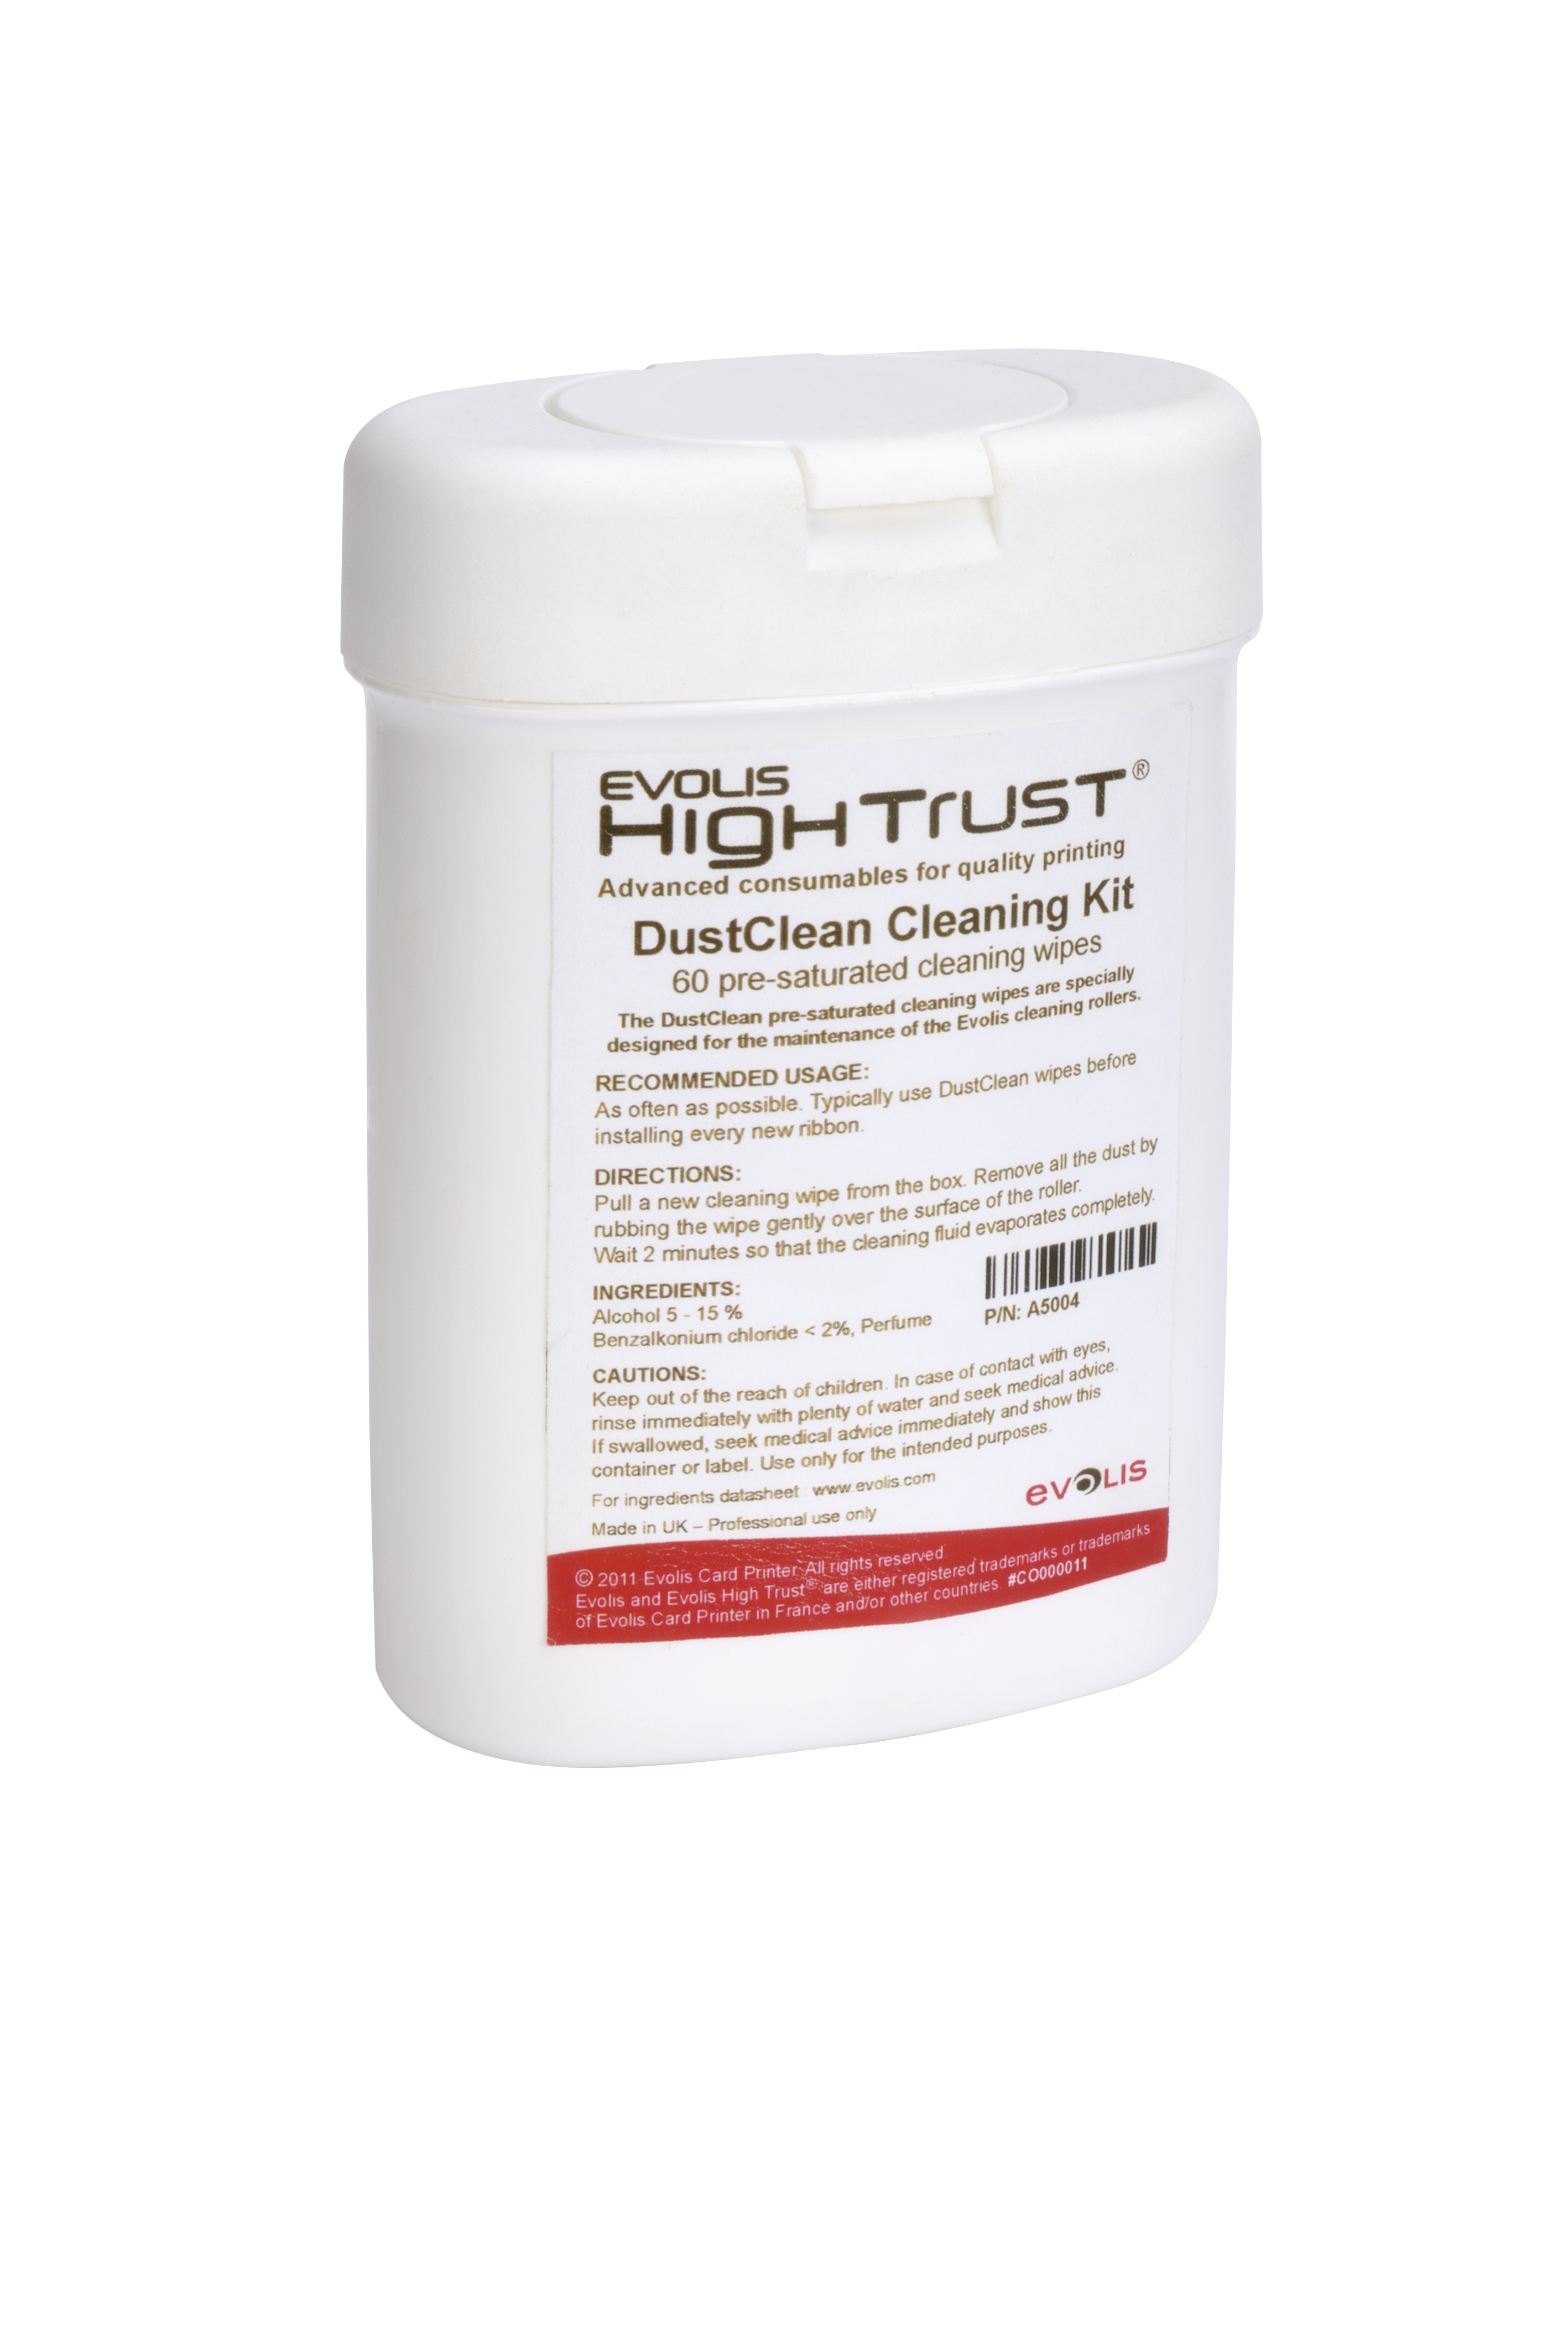 Evolis A5004 Dustclean Cleaning Kit for Cleaning Rollers - 60 Wipes